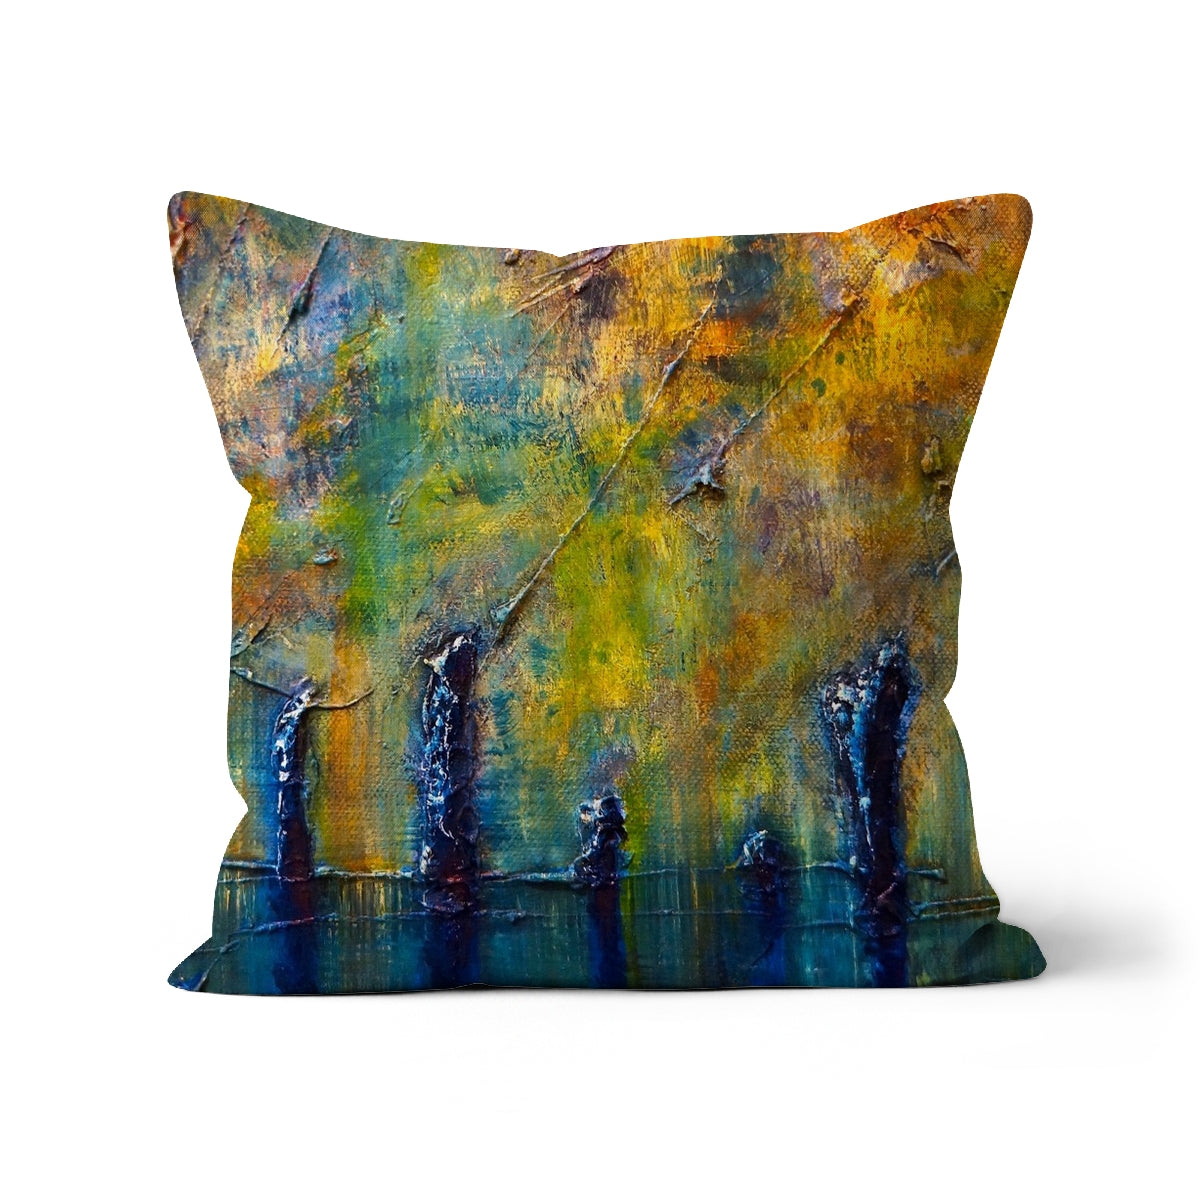 Stenness Moonlight Orkney Art Gifts Cushion-Cushions-Orkney Art Gallery-Faux Suede-18"x18"-Paintings, Prints, Homeware, Art Gifts From Scotland By Scottish Artist Kevin Hunter